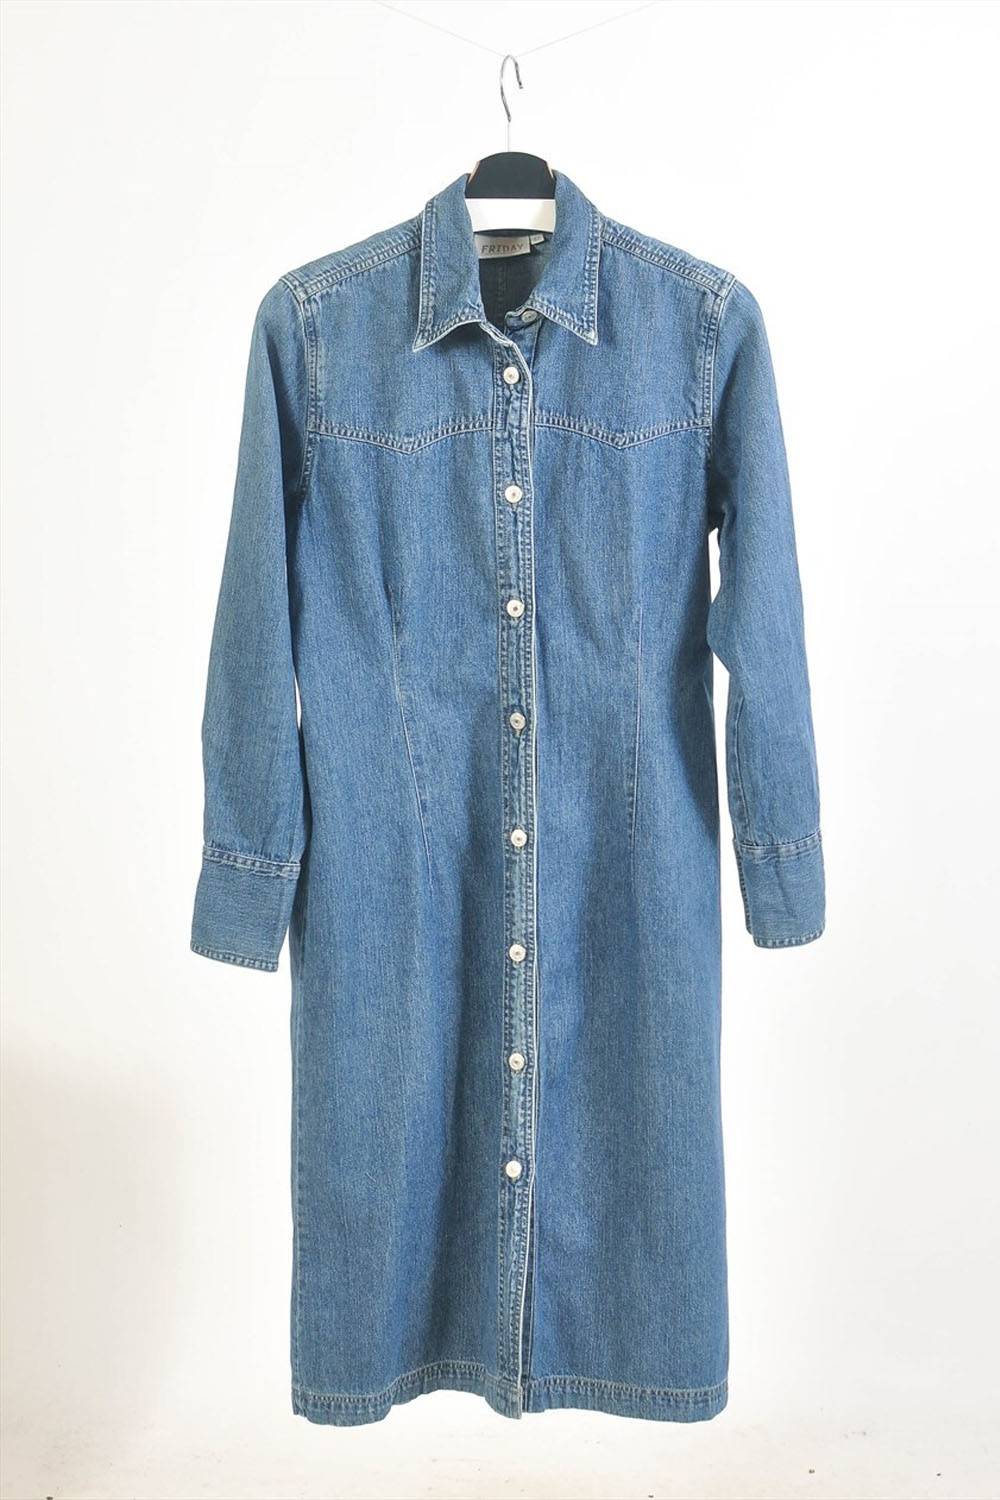 15 Best Affordable And Sustainable Denim Dresses | Panaprium